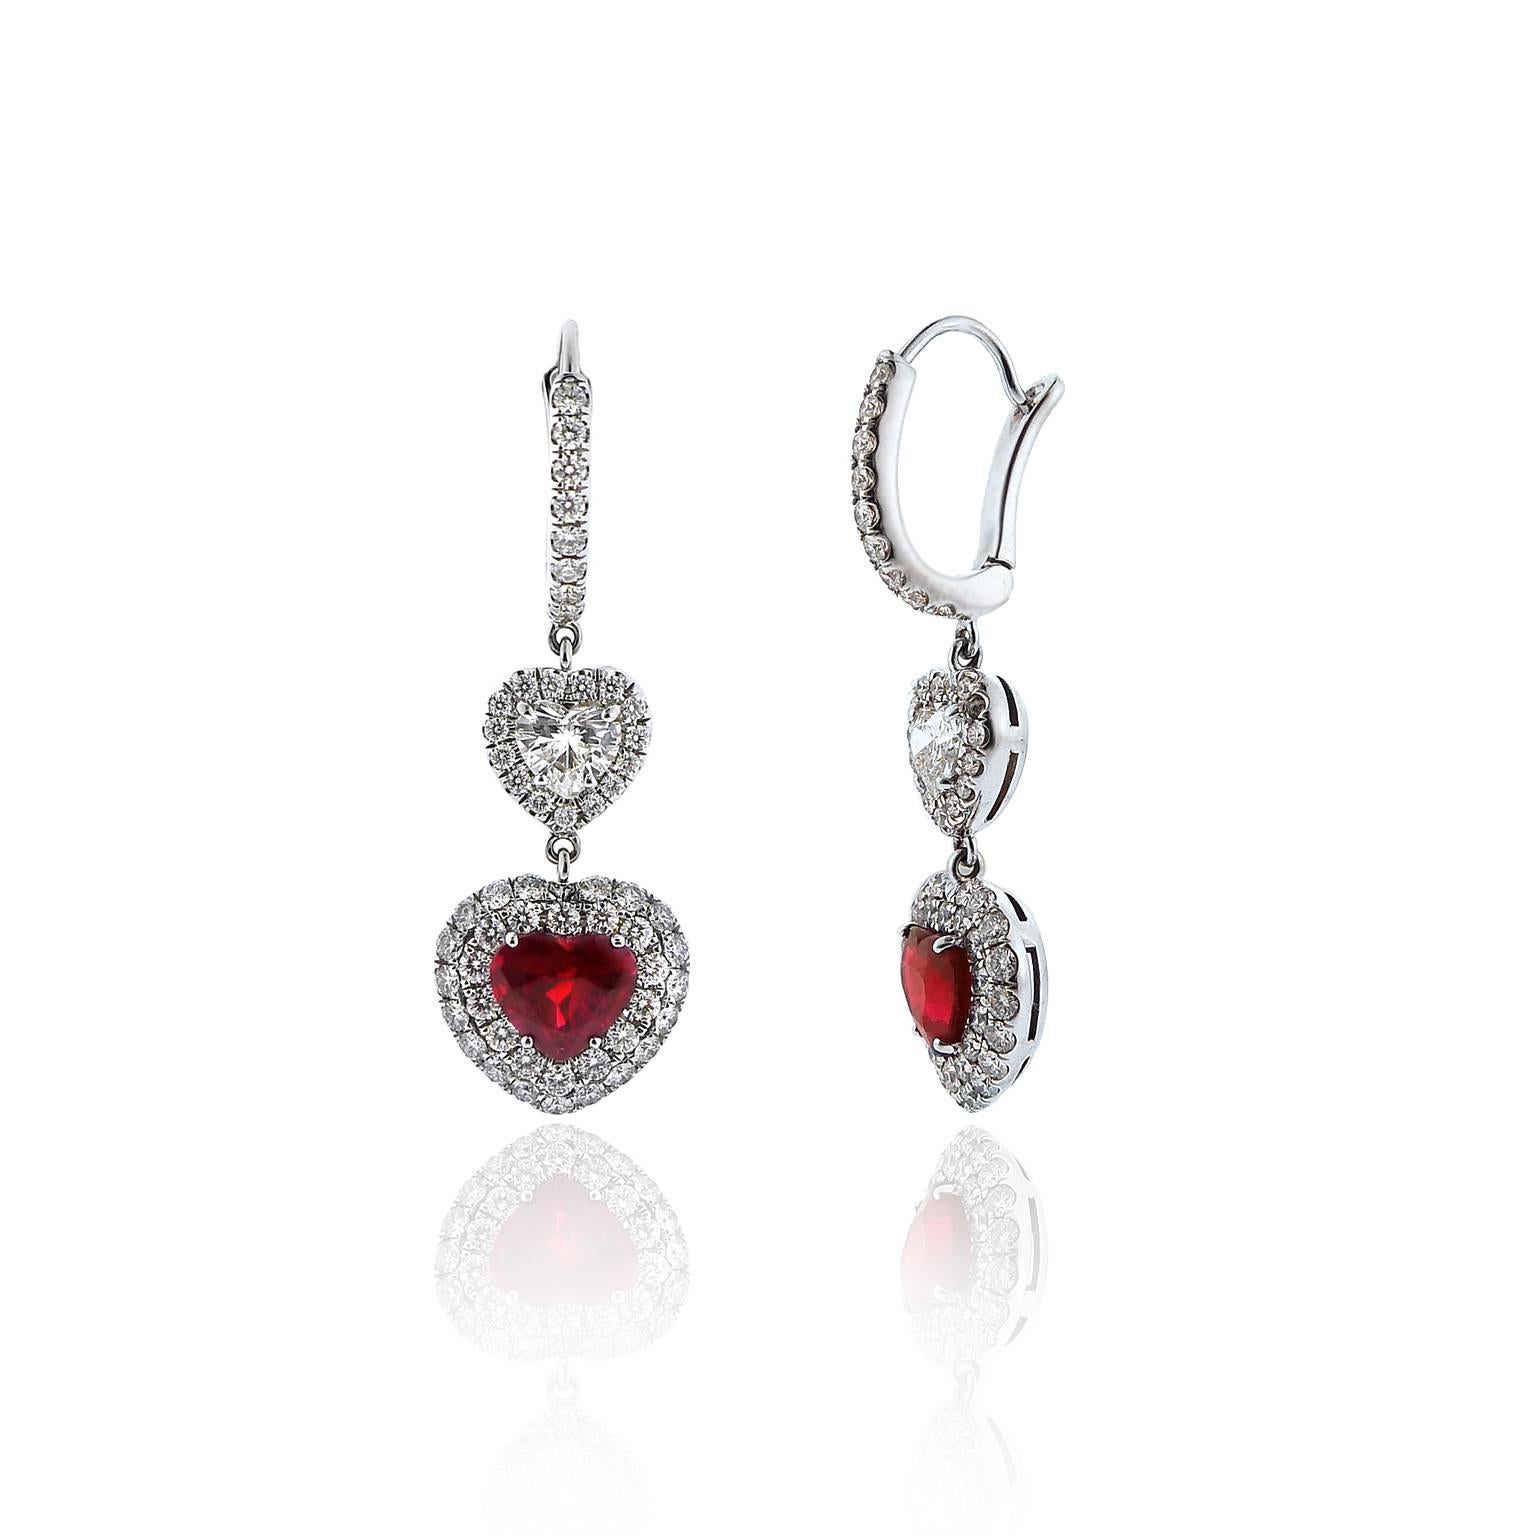 A perfectly matched pair of heart-shaped Burmese rubies weigh 3.30 carats for the pair and have GRS certificates stating the rubies are of Burmese origin and 